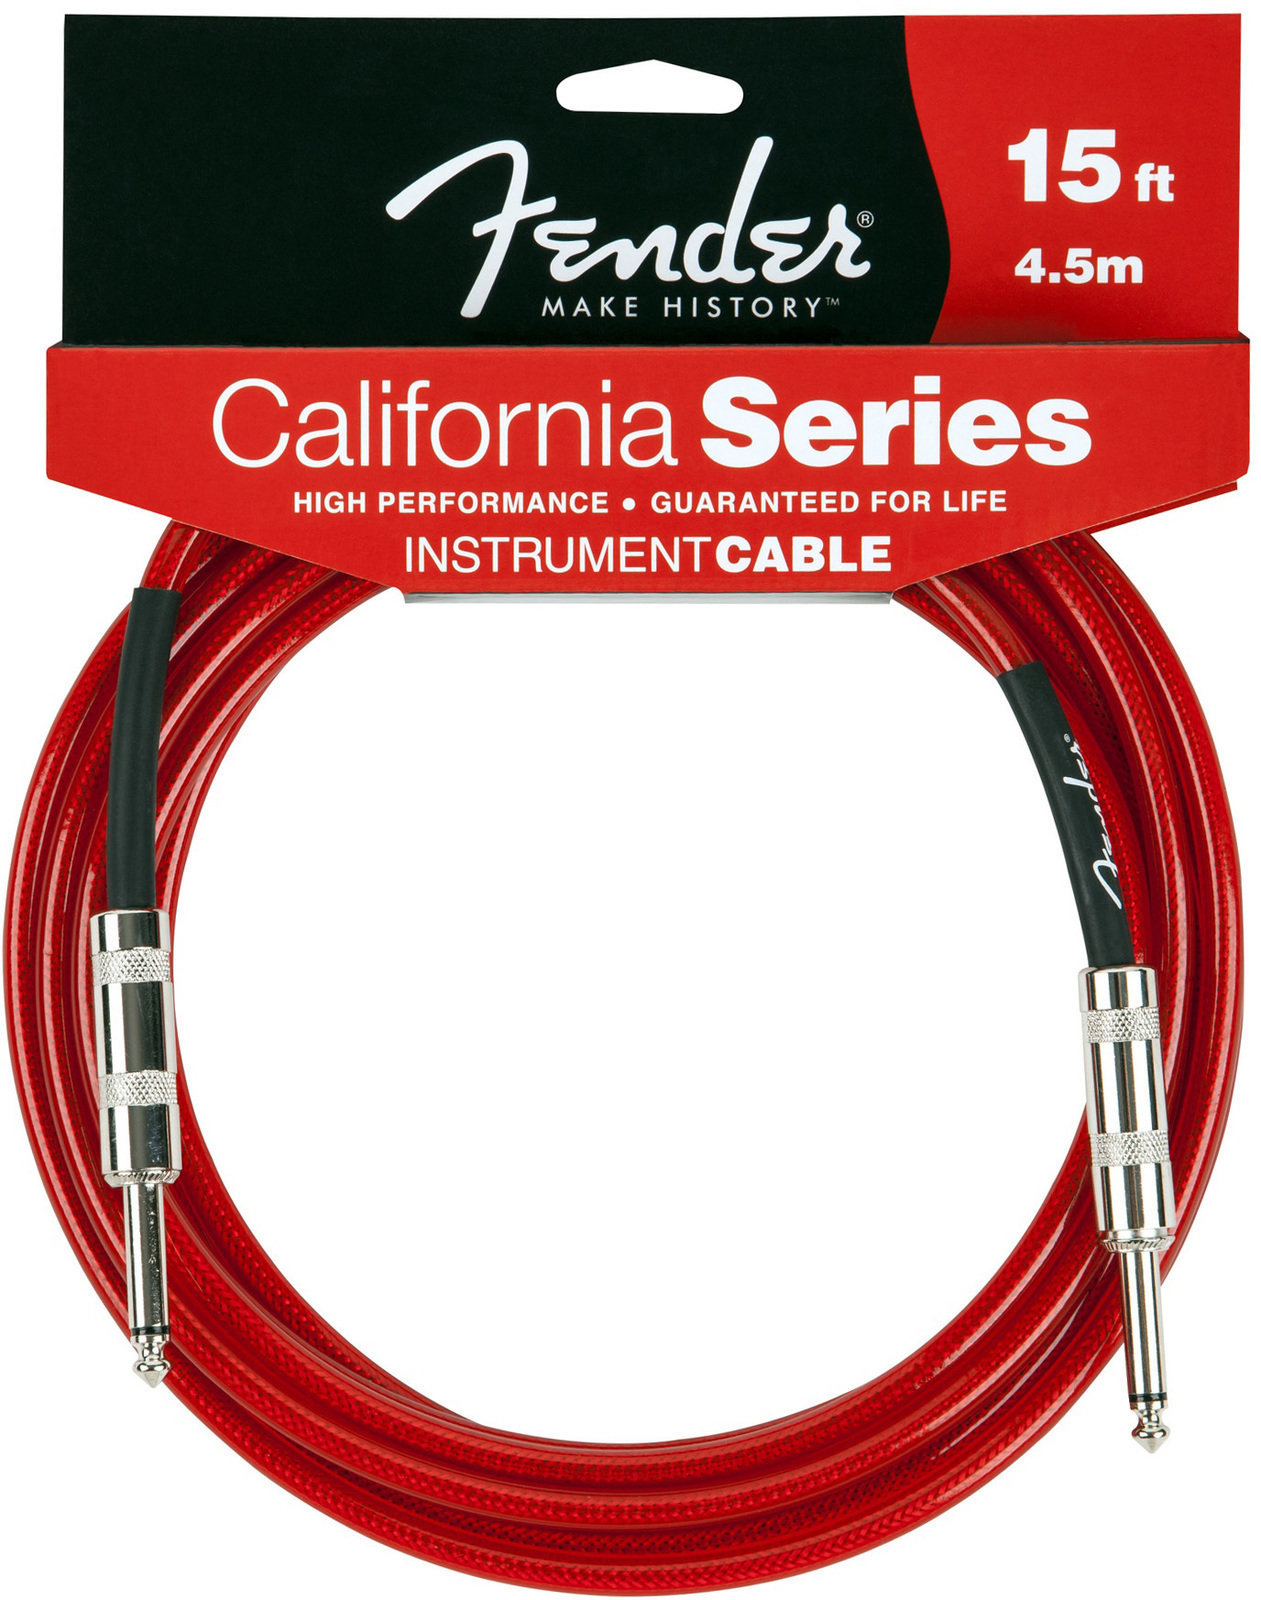 Câble pour instrument Fender California Instrument Cable 4,5m - Candy Apple Red